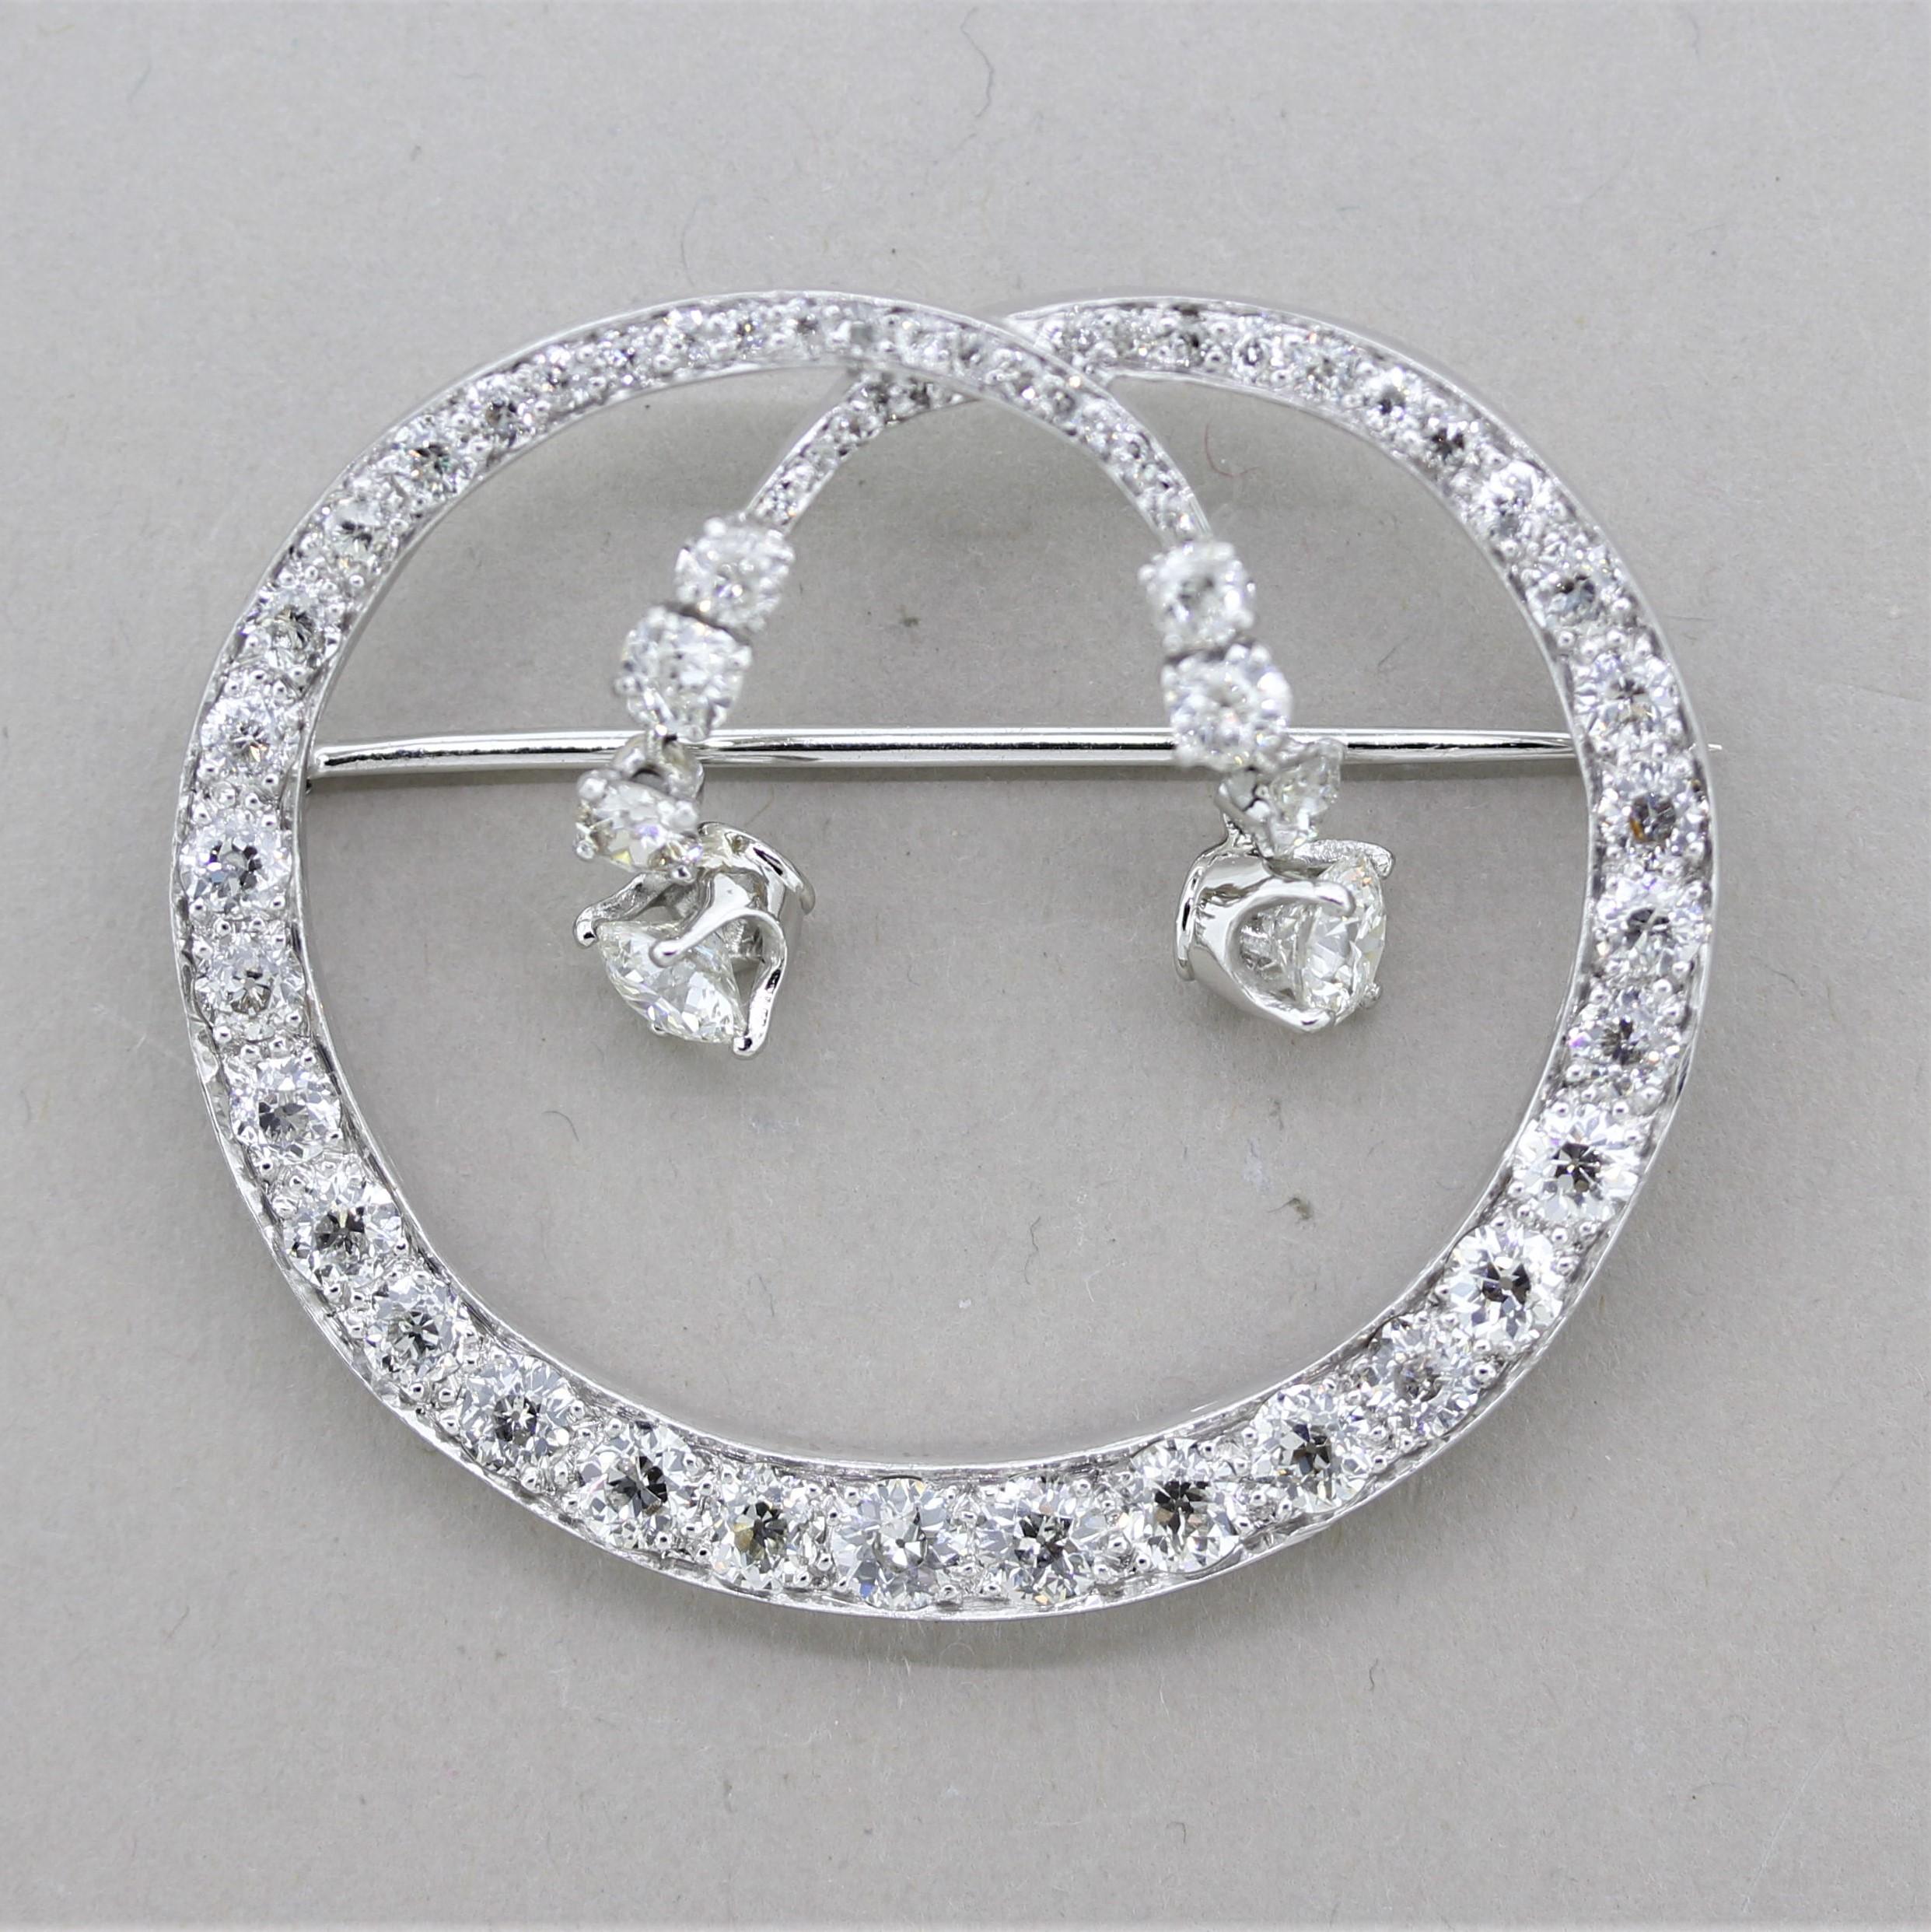 A lovely platinum piece originally from the 1930’s Art Deco period which was later modified with two round brilliant-cut diamonds in the 1950’s. It features approximately 6 carats of European-cut diamonds set all around the brooch along with two